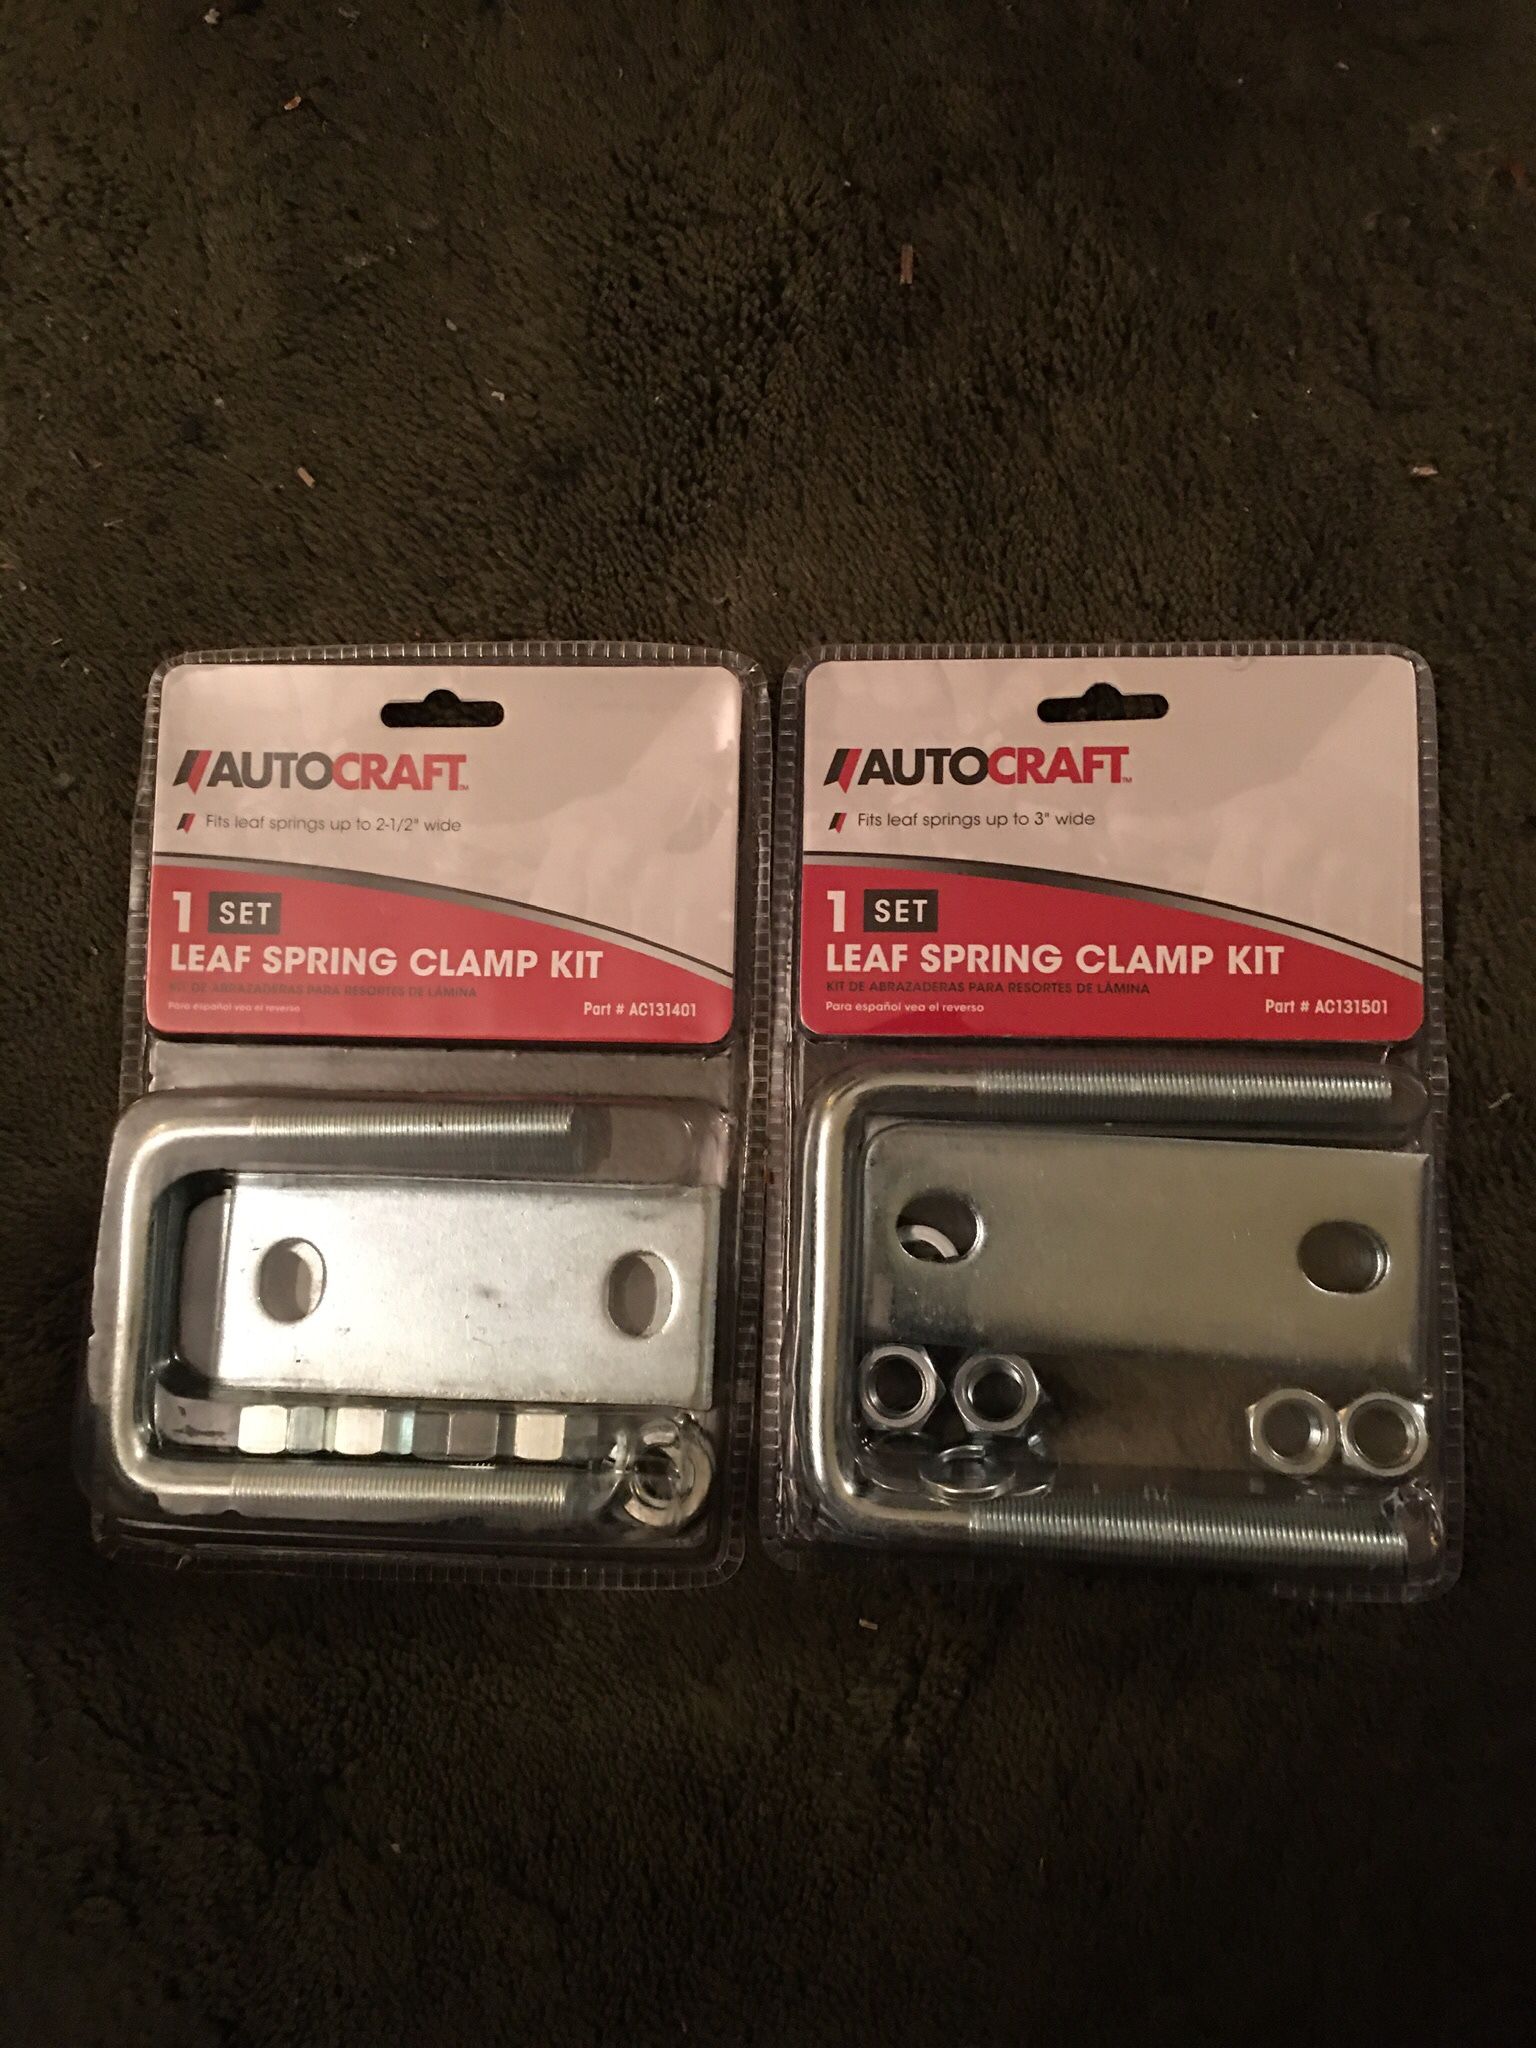 BRAND NEW NEVER USED AUTOCRAFT LEAF SPRING CLAMP KIT 2-1/2” INCH WIDE AND 3” INCH WIDE $20.00